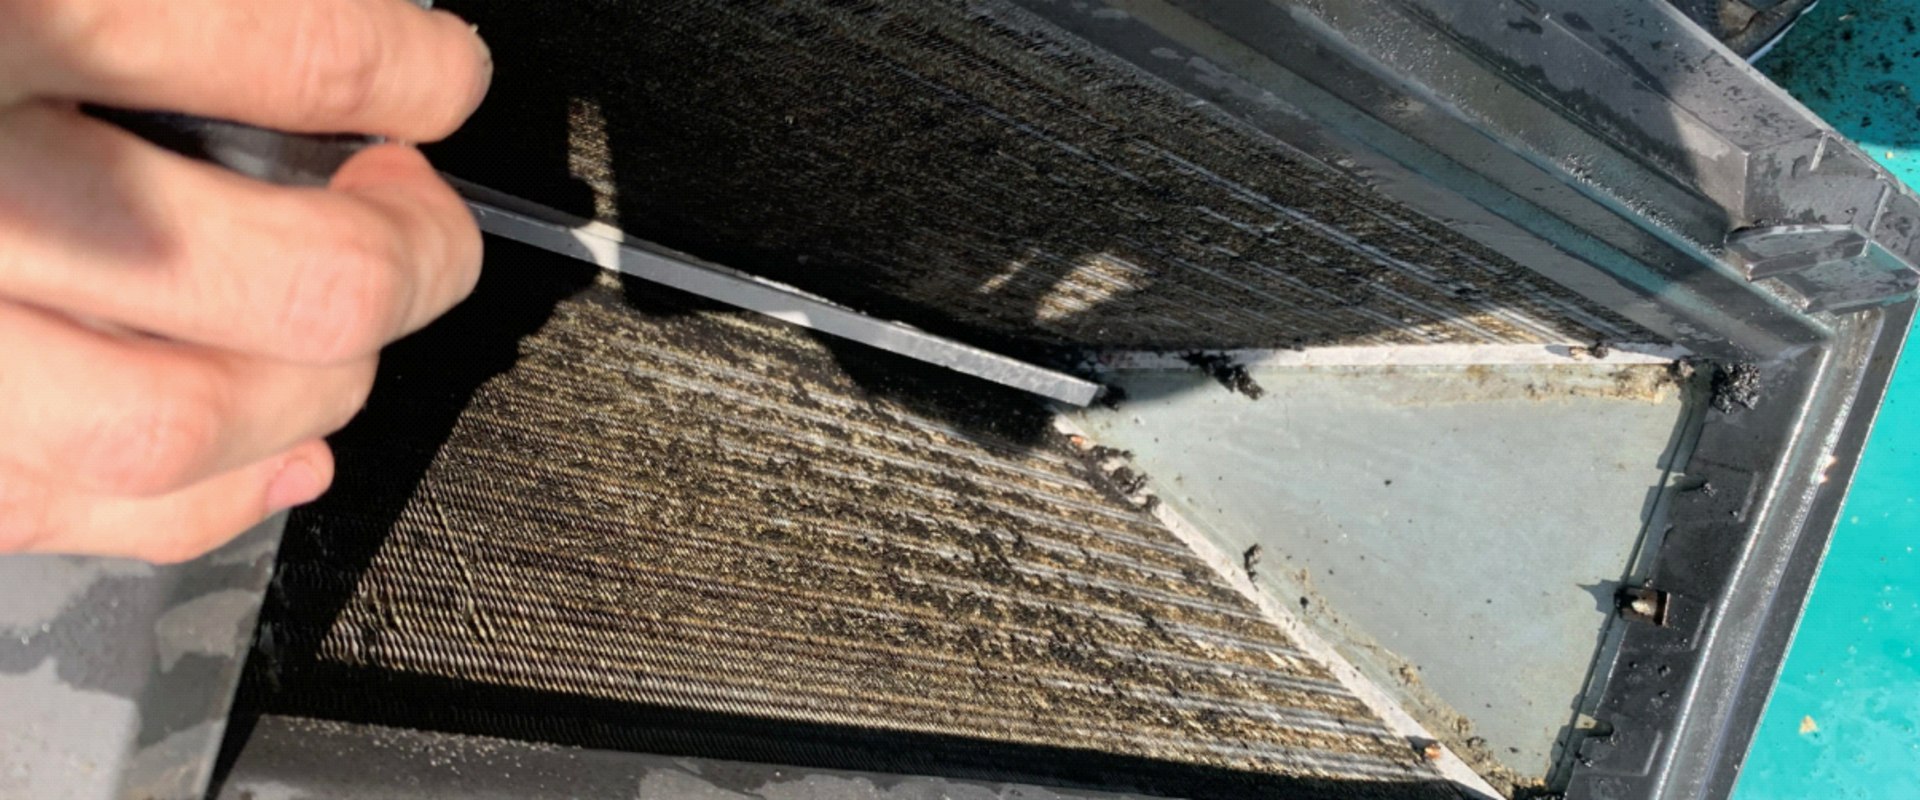 Is Your Evaporator Coil in Need of Cleaning or Replacing?